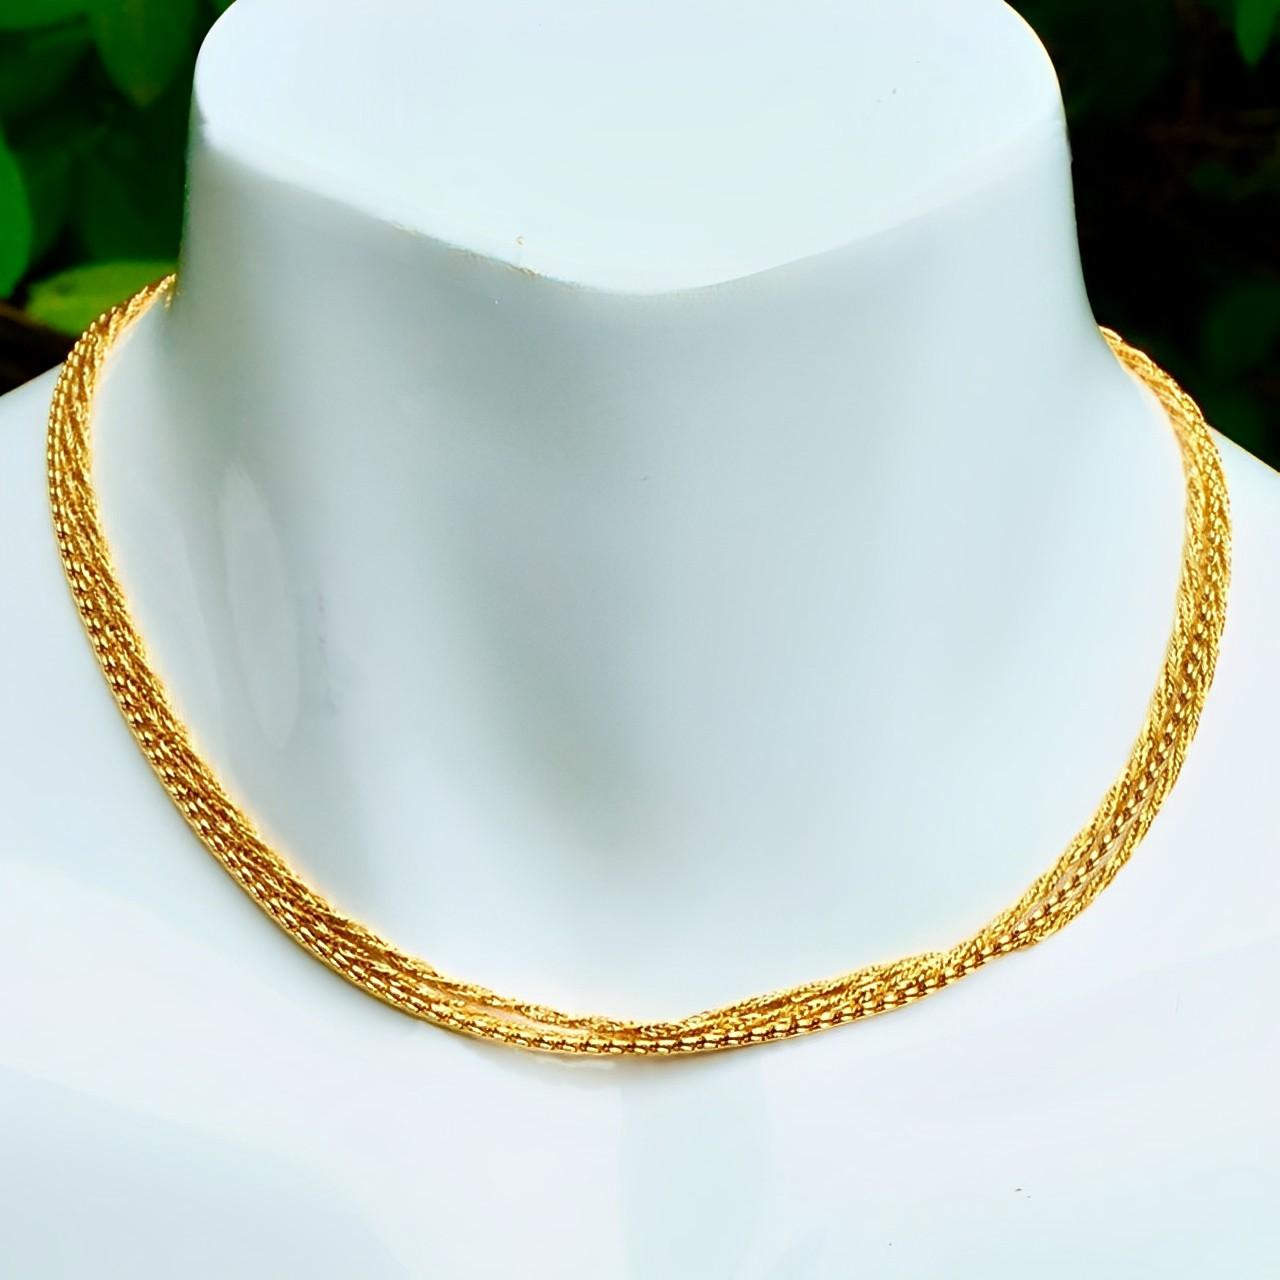 Michelle René Gold Plated Three Strand Rope and Serpentine Necklace circa 1980s In Excellent Condition For Sale In London, GB